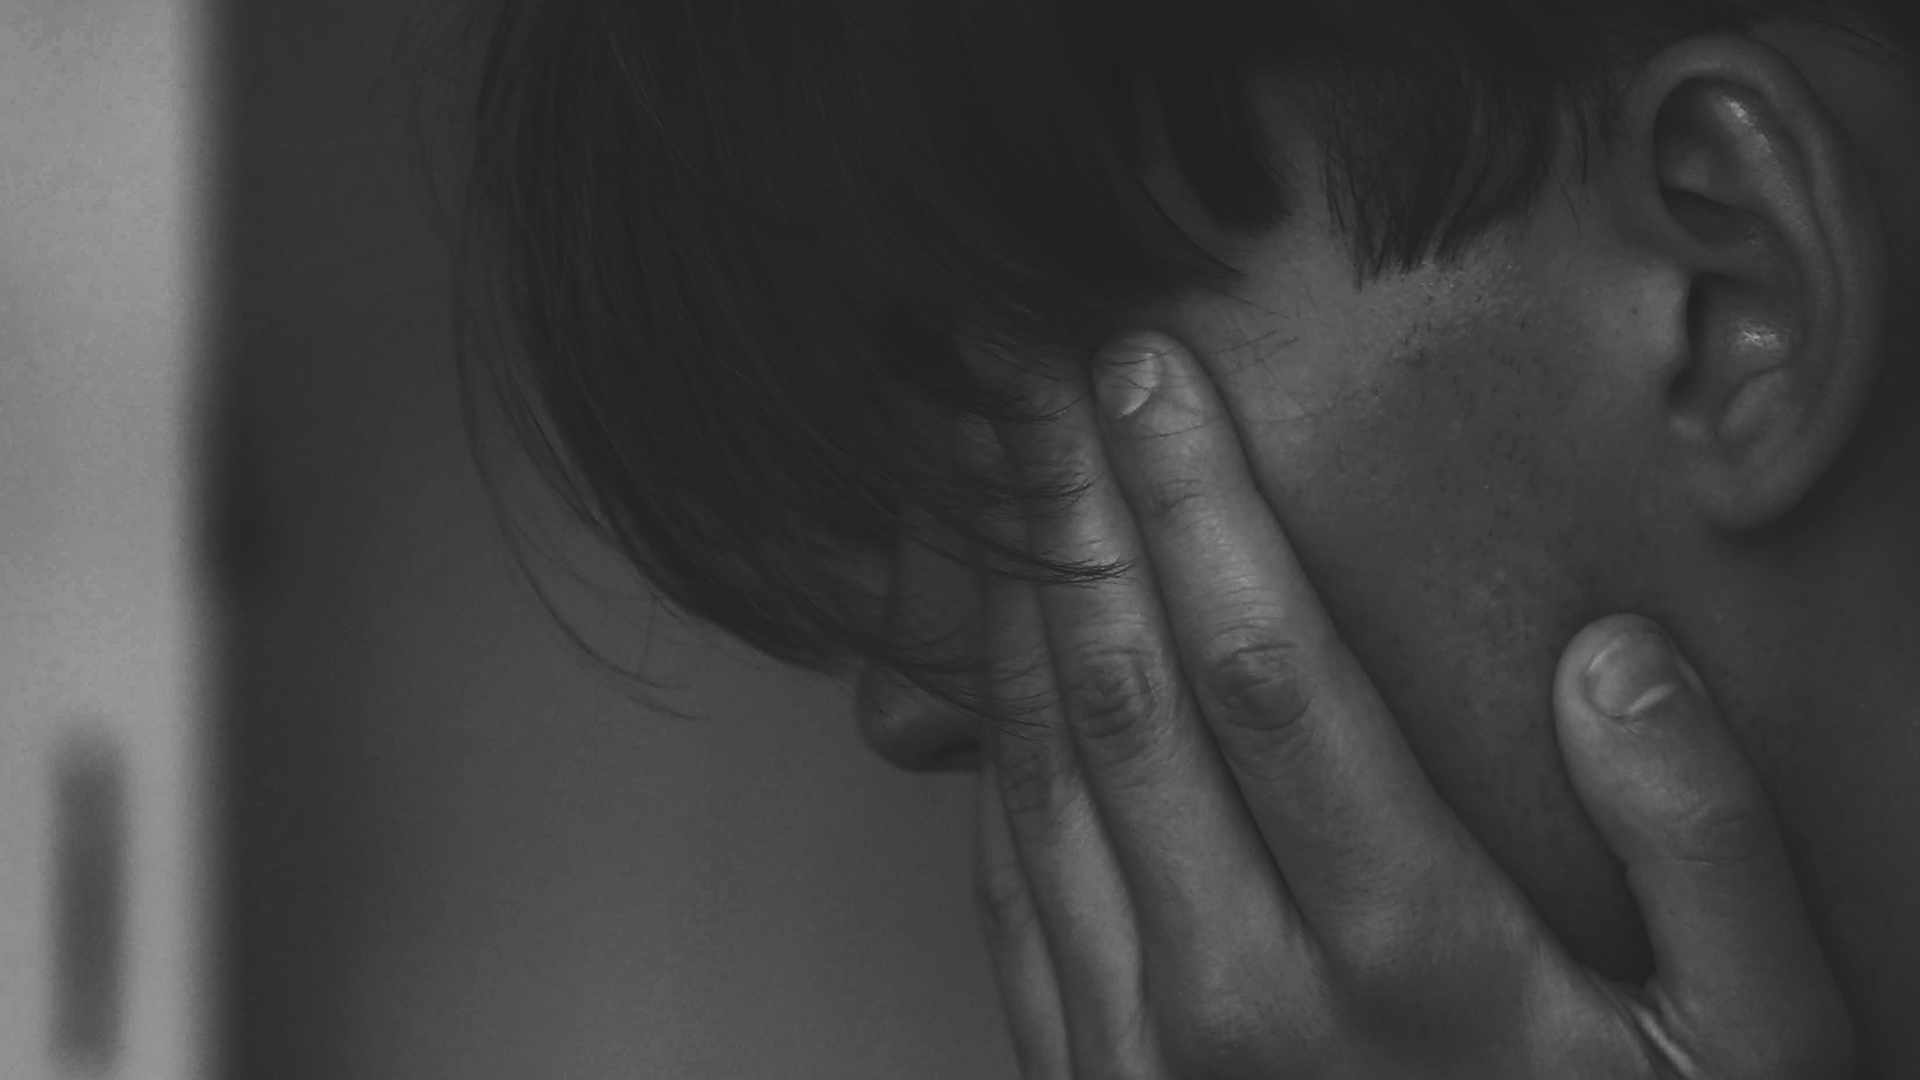 Black and white image of a person who is upset